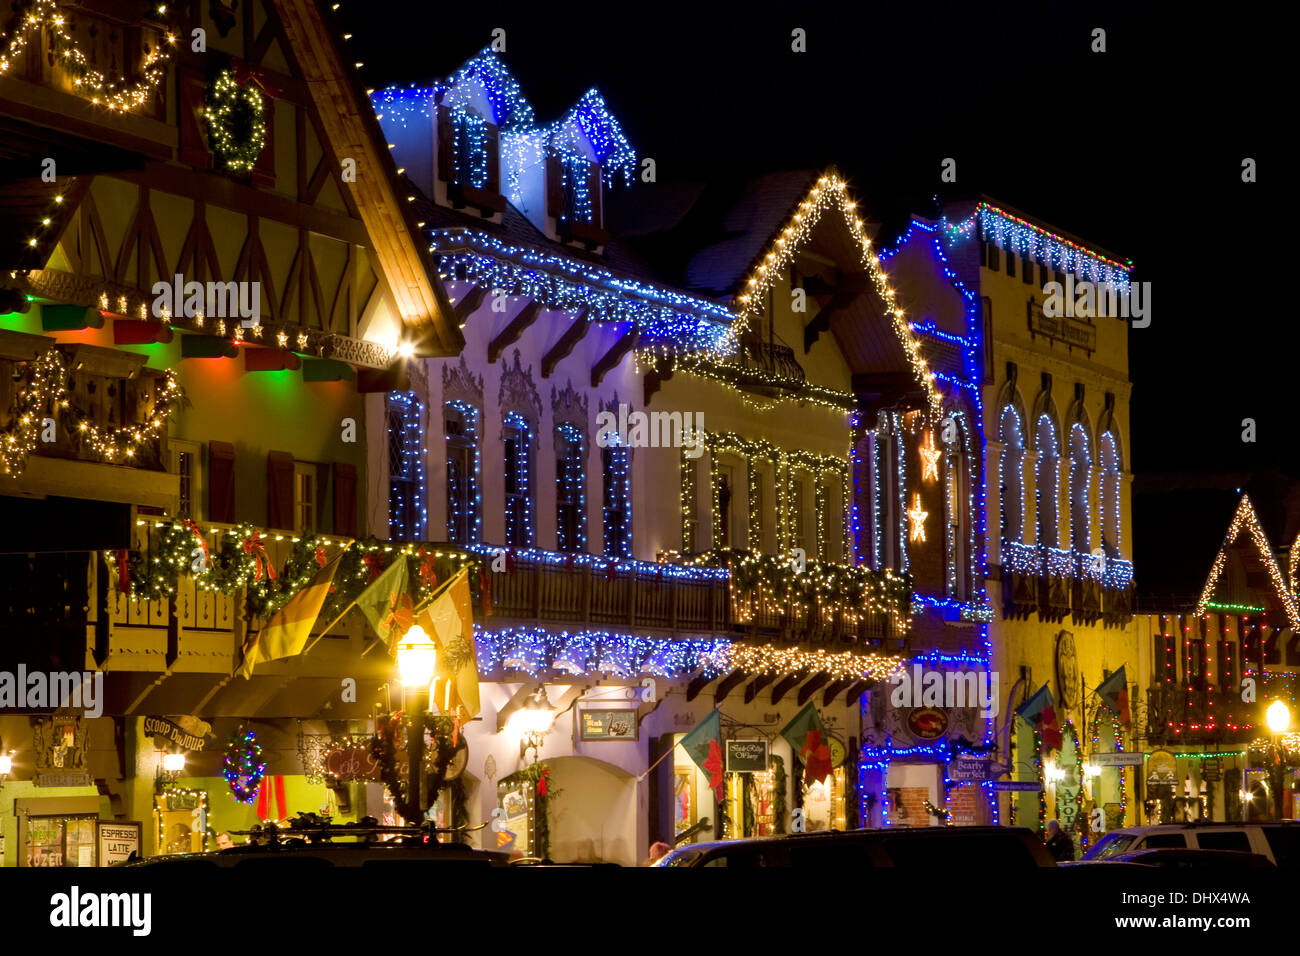 The town of Leavenworth decorated in Christmas lights for the holiday season, Washington. Stock Photo